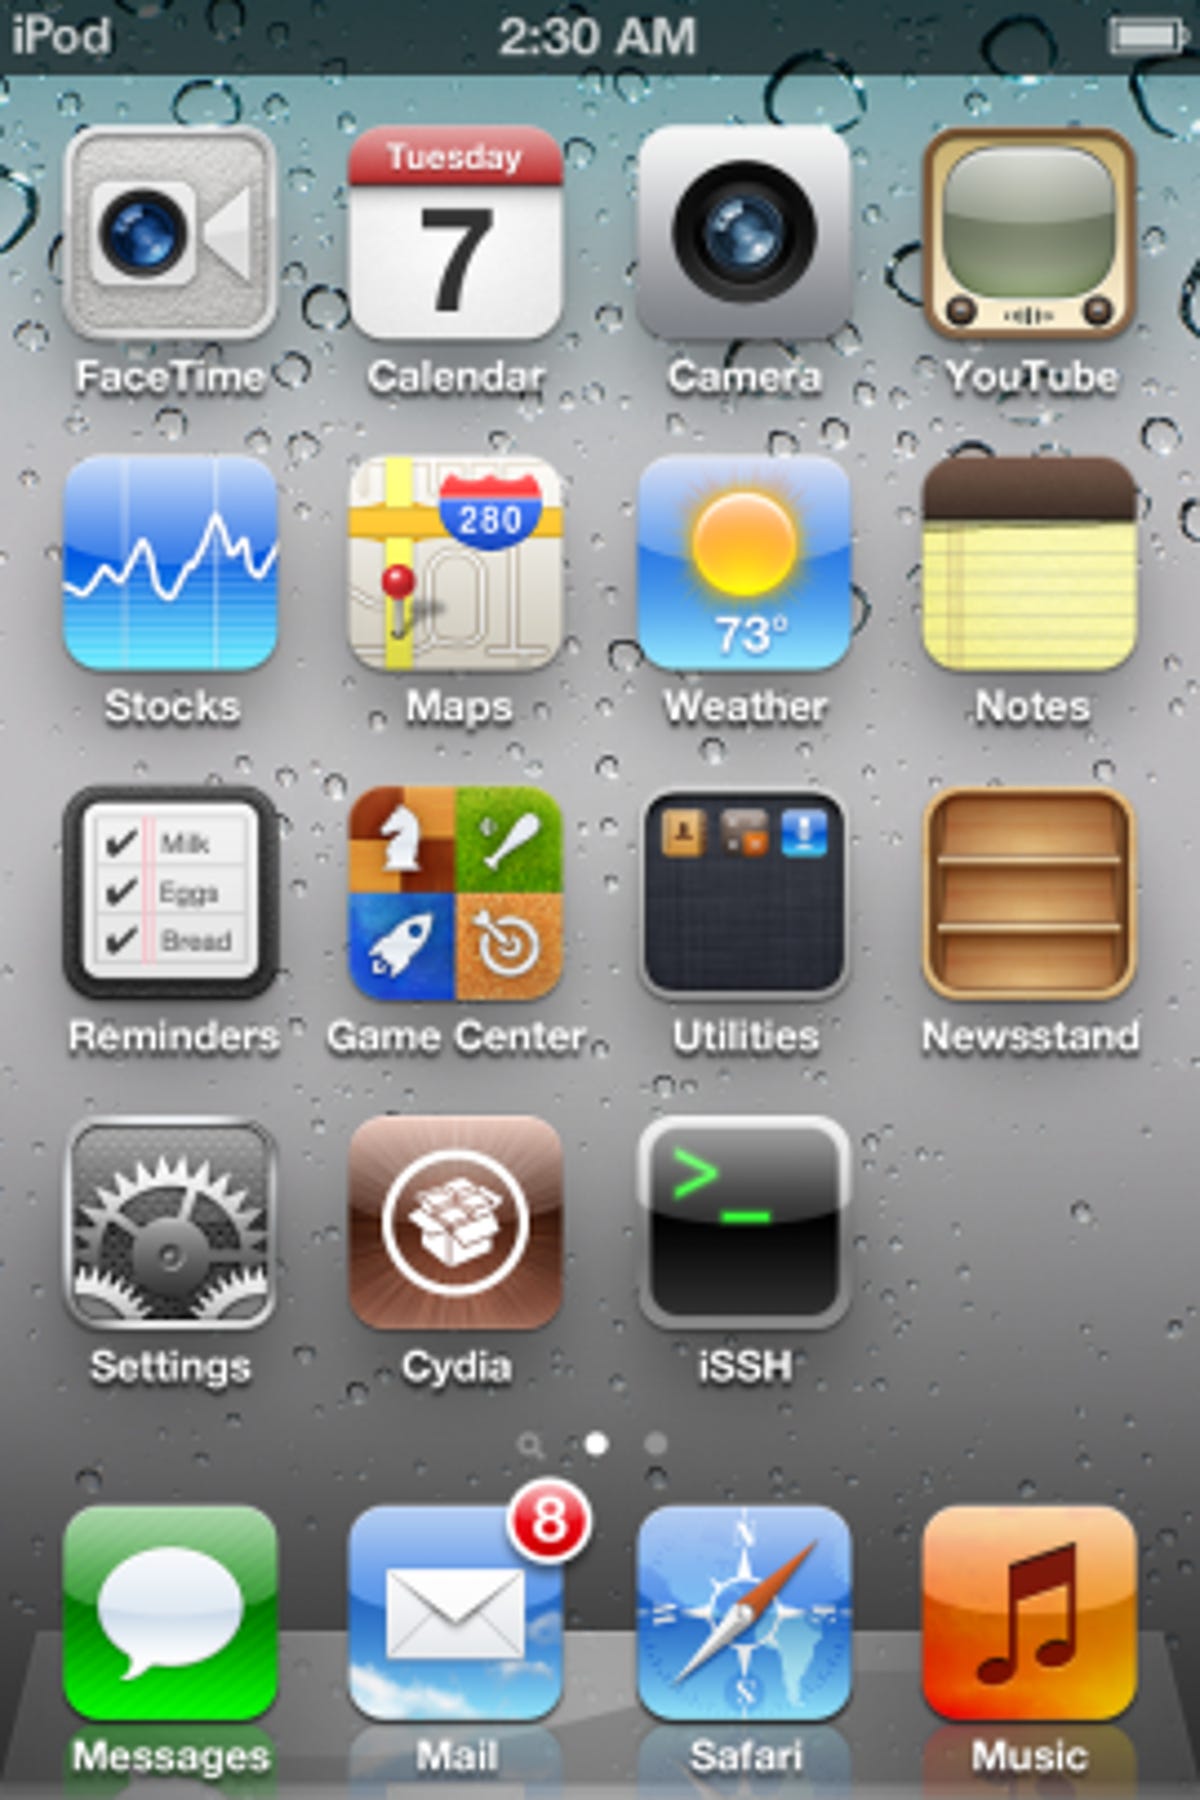 A shot of an iPod Touch with what is purportedly a jailbroken version of iOS 5.